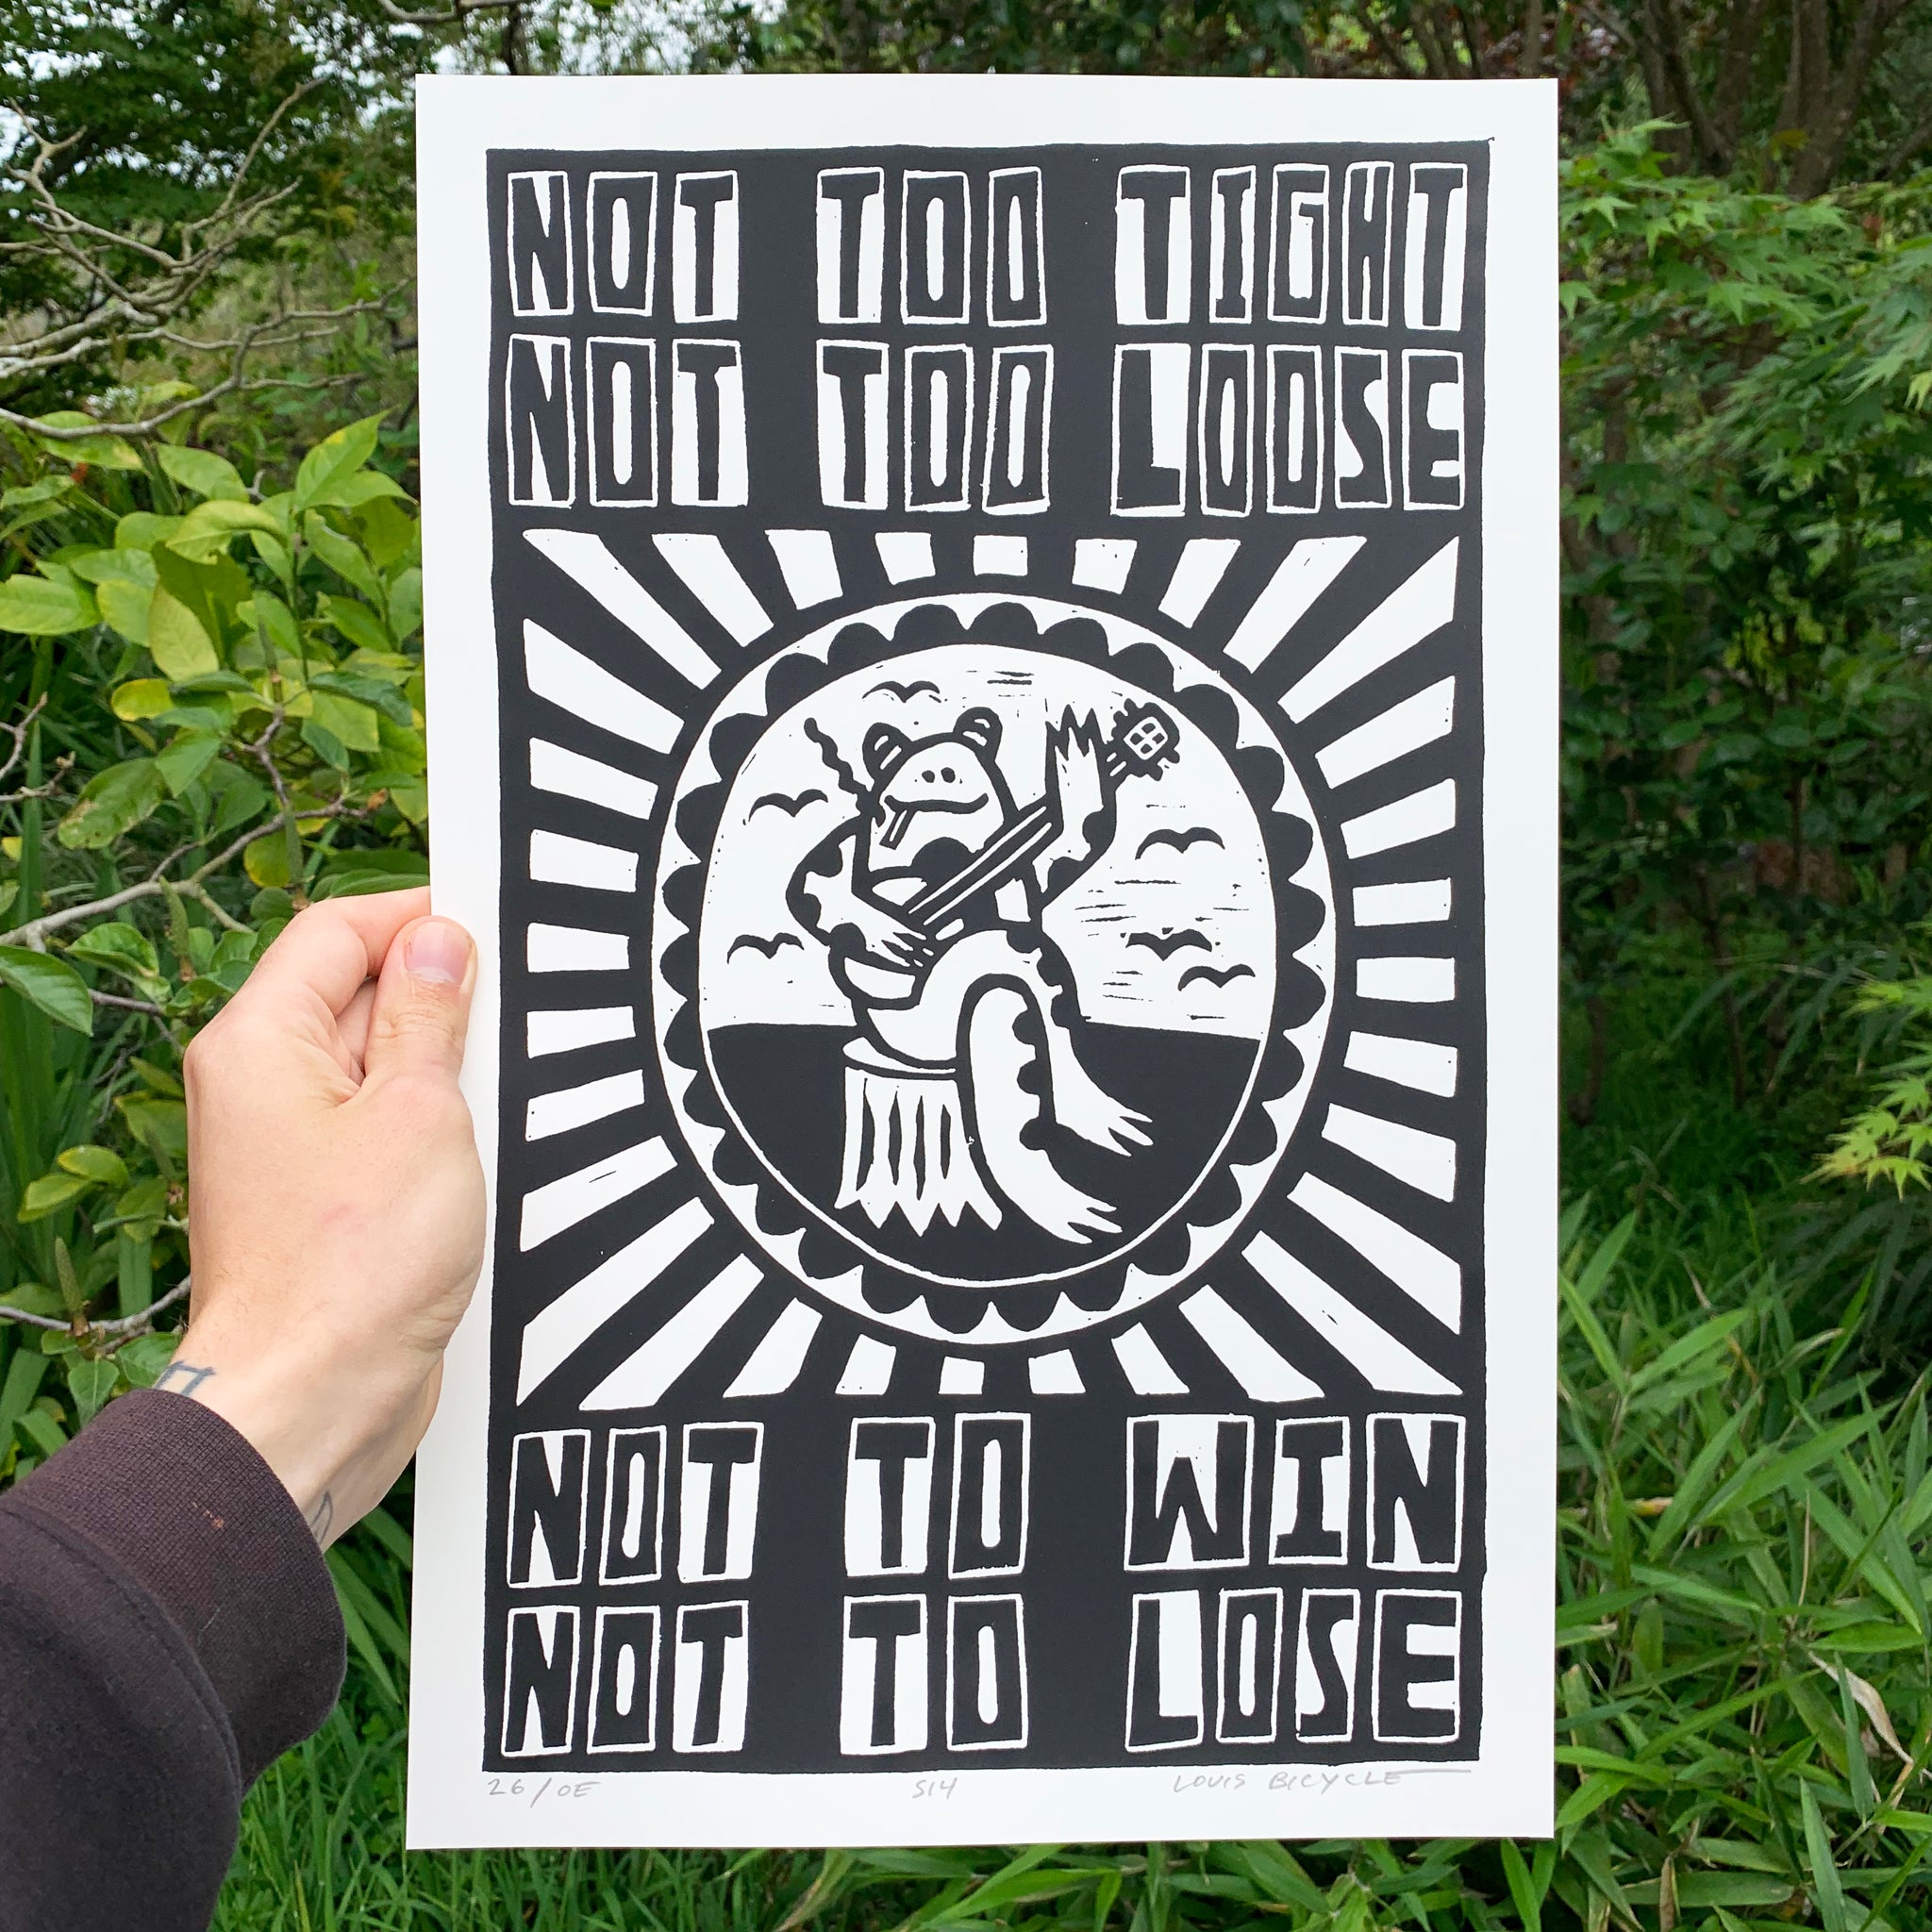 Screen printed poster by artist Louis Bicycle. Frog playing banjo. Text "Not too tight, not too loose, not to win, not to lose."